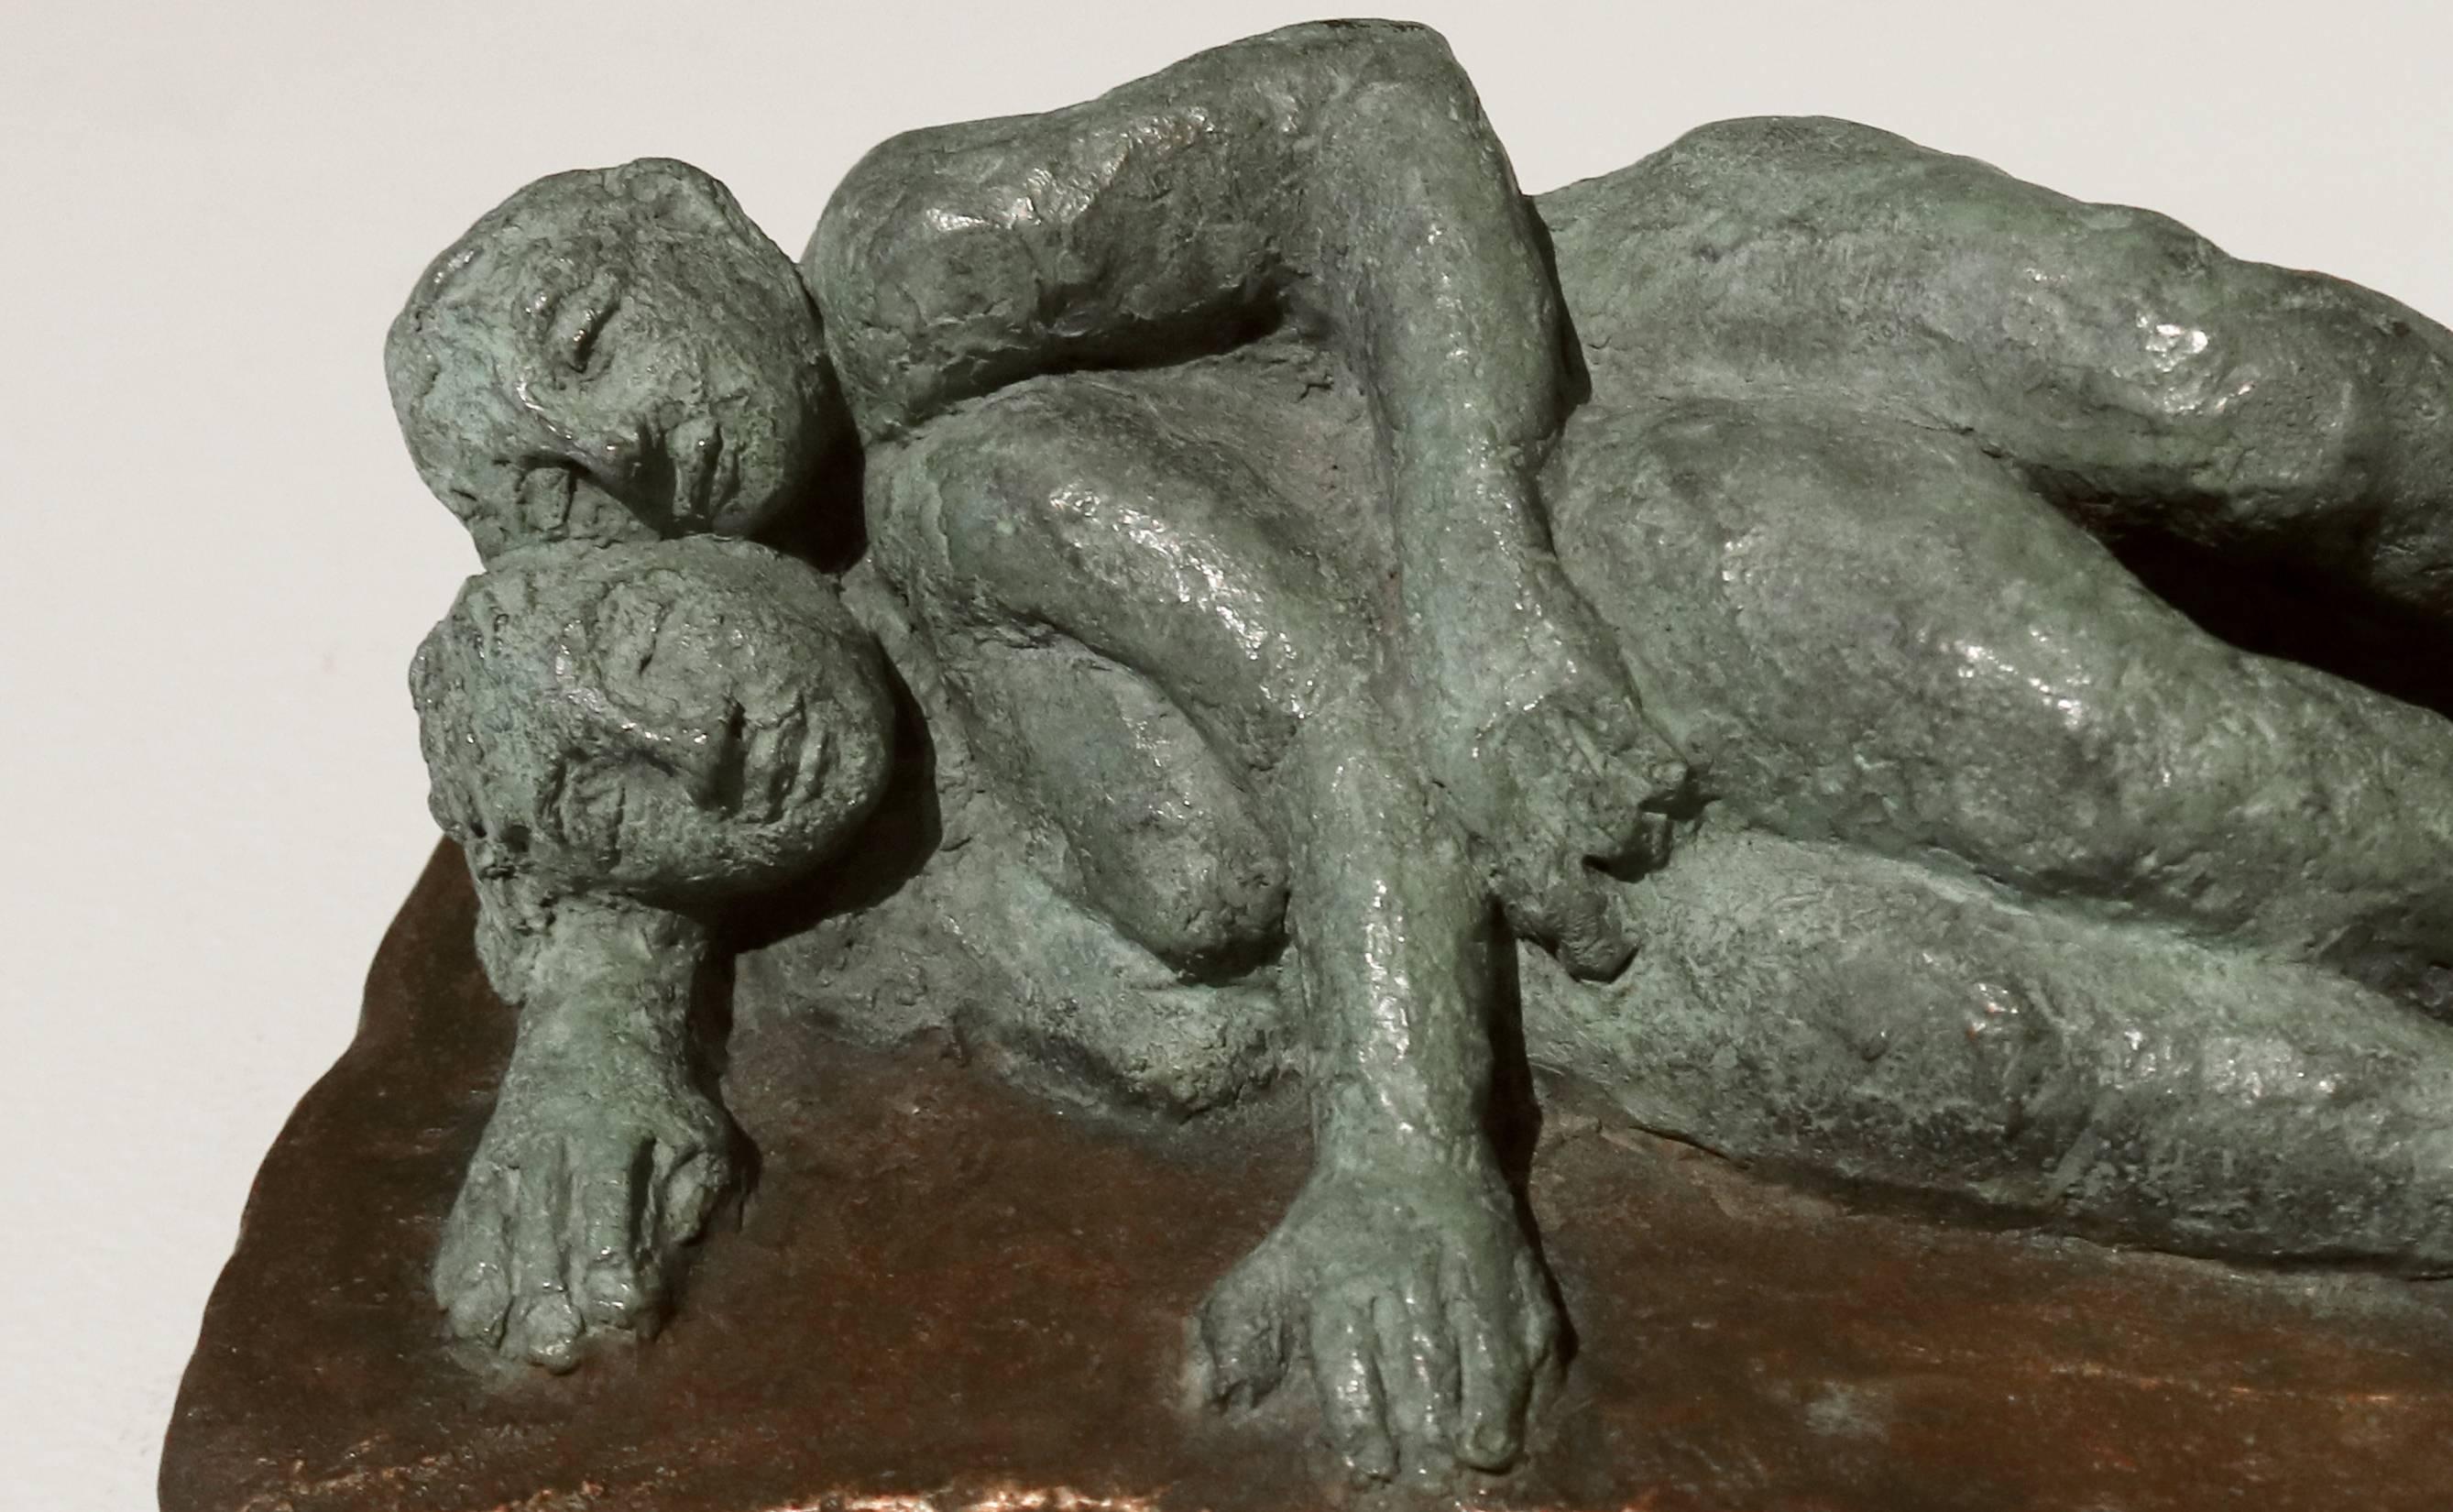 This small bronze sculpture features a peacefully reclining couple wrapped in a sweet embrace. The couple are finished with a soft green patina, which contrasts beautifully with the warm bronze surface on which they recline. It is #3 in an edition